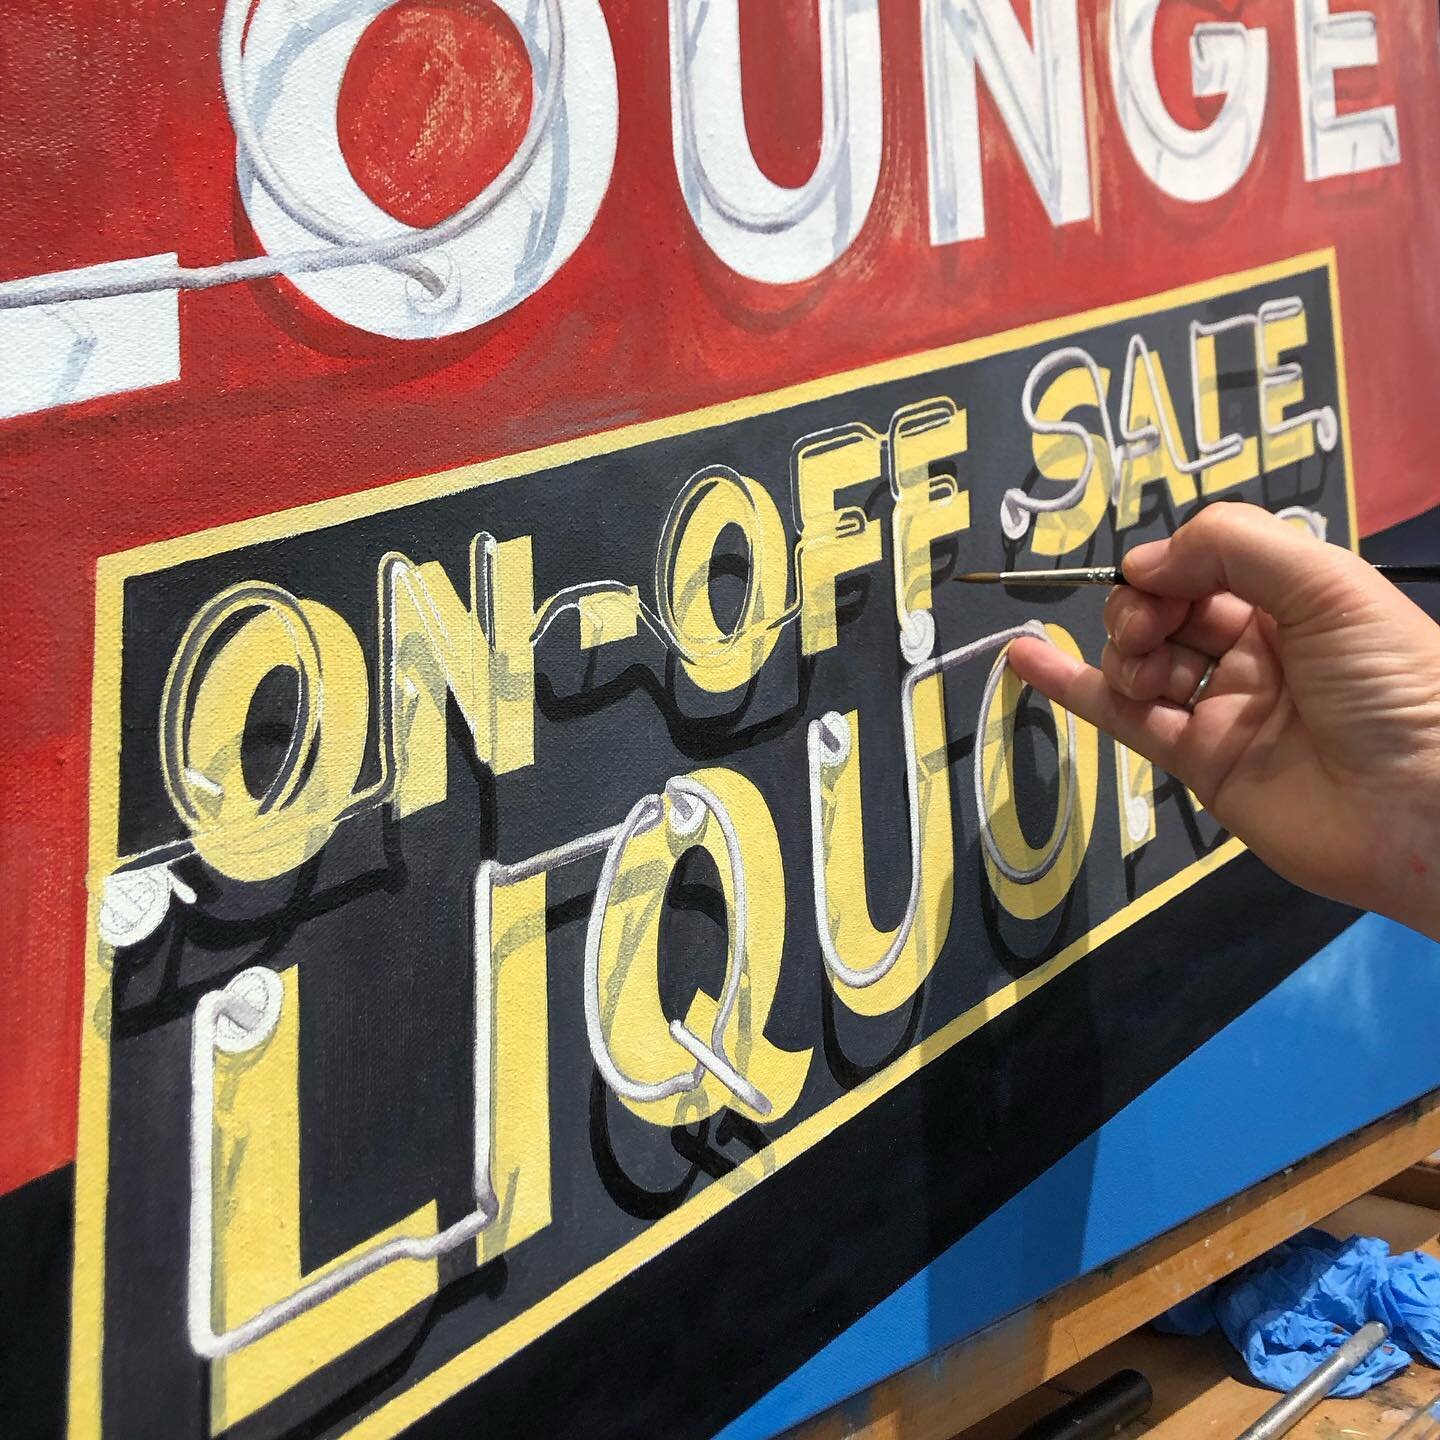 Driving around Minnesota I noticed a lot of bars with &ldquo;on-off sale&rdquo; signs. Turns out that means they sell drinks to consume &ldquo;on&rdquo; premises  bellied up to the bar or &ldquo;off&rdquo; premises to take away with you. Just a littl